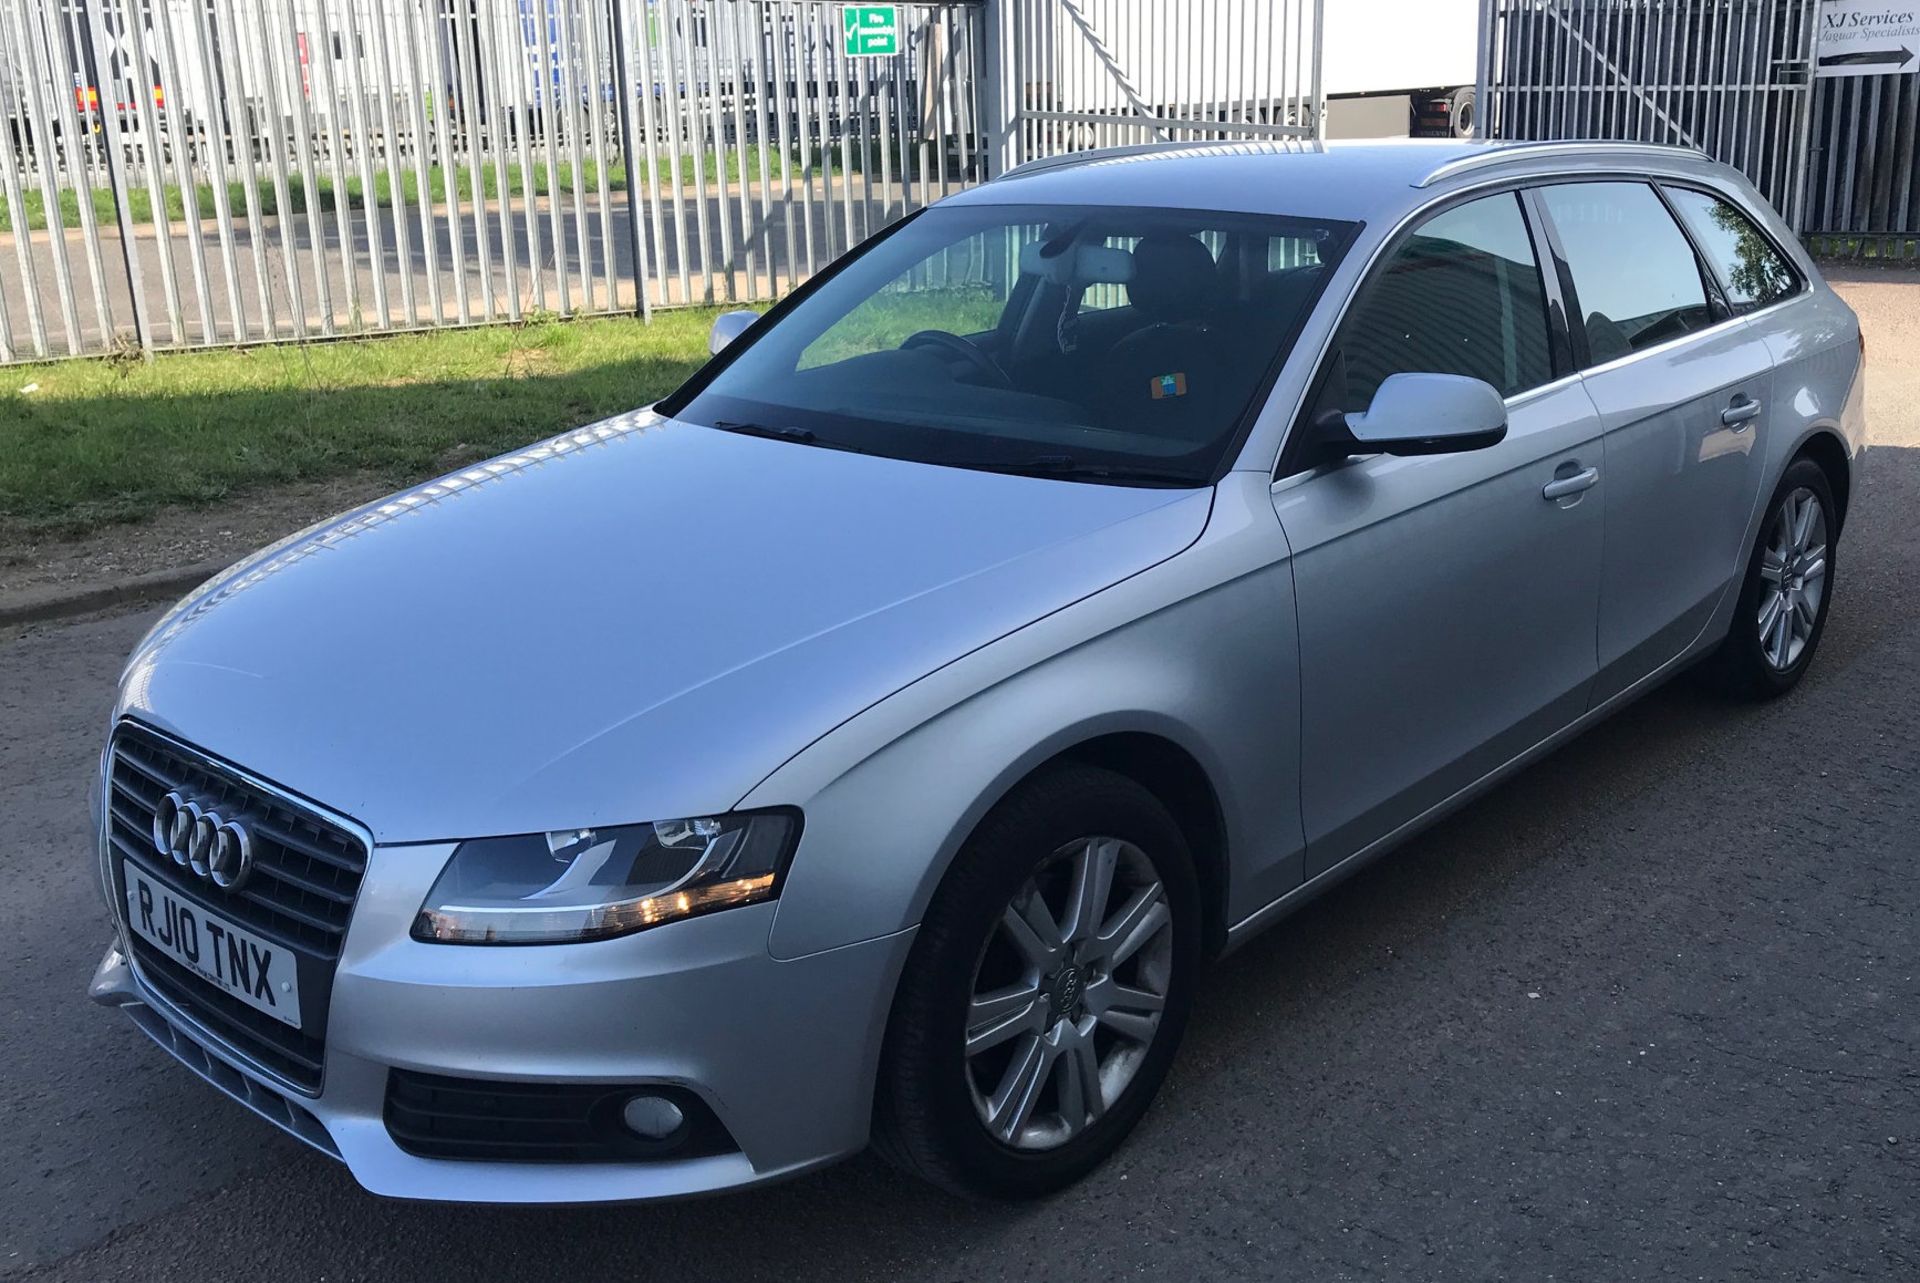 2010 Audi A4 2.0 Tdi SE Avant Automatic 5 Door Estate - CL505 - NO VAT ON THE HAMMER - Location: - Image 2 of 13